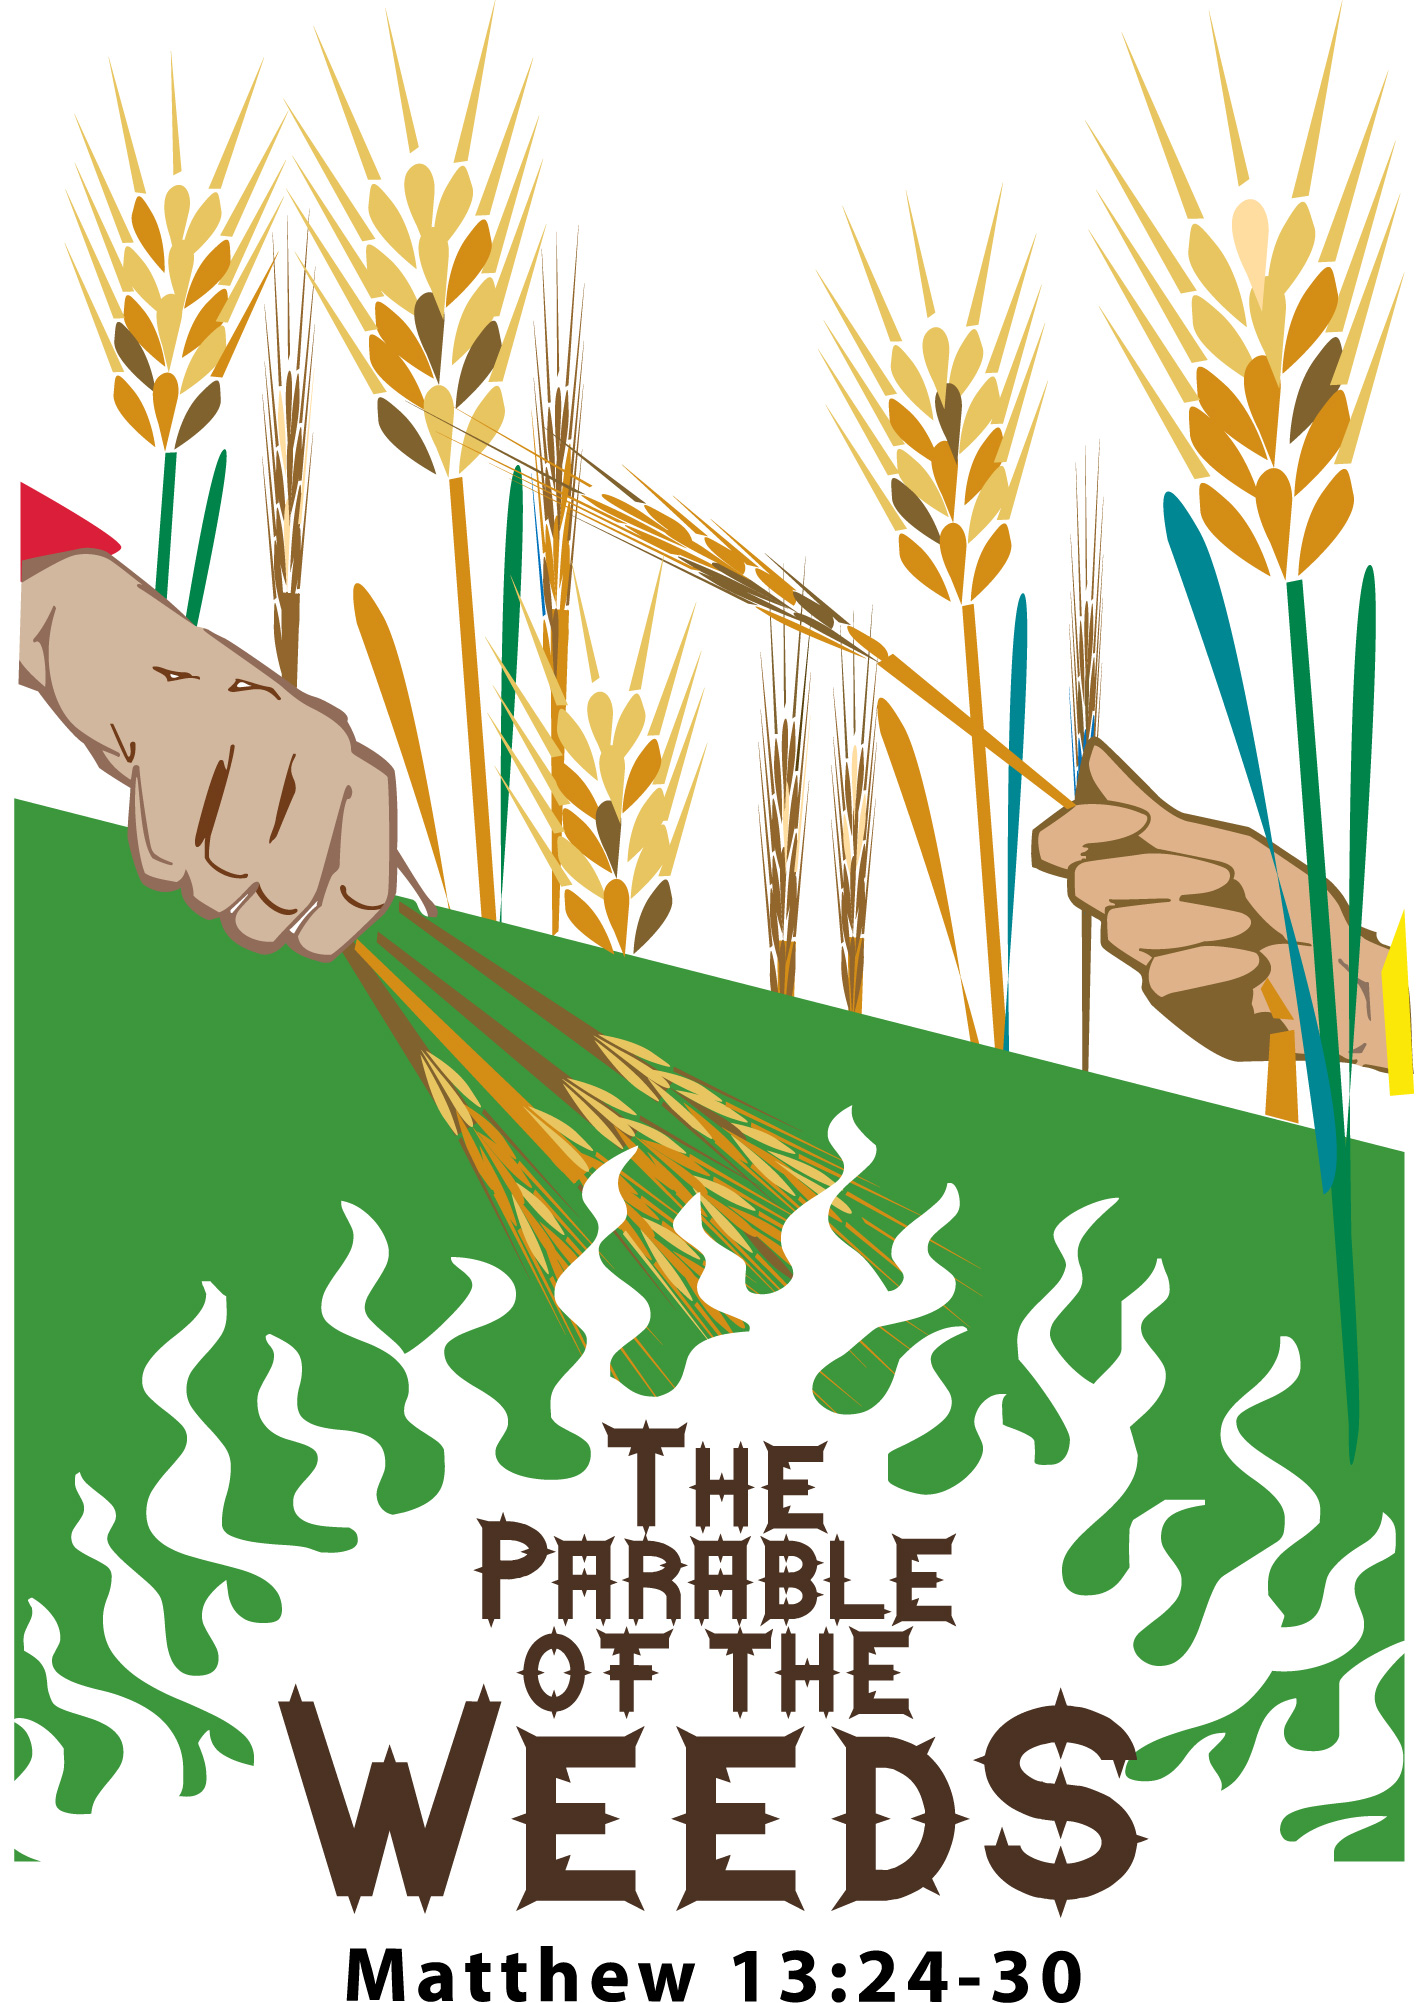 The Parable of the Wheat and the Weeds.